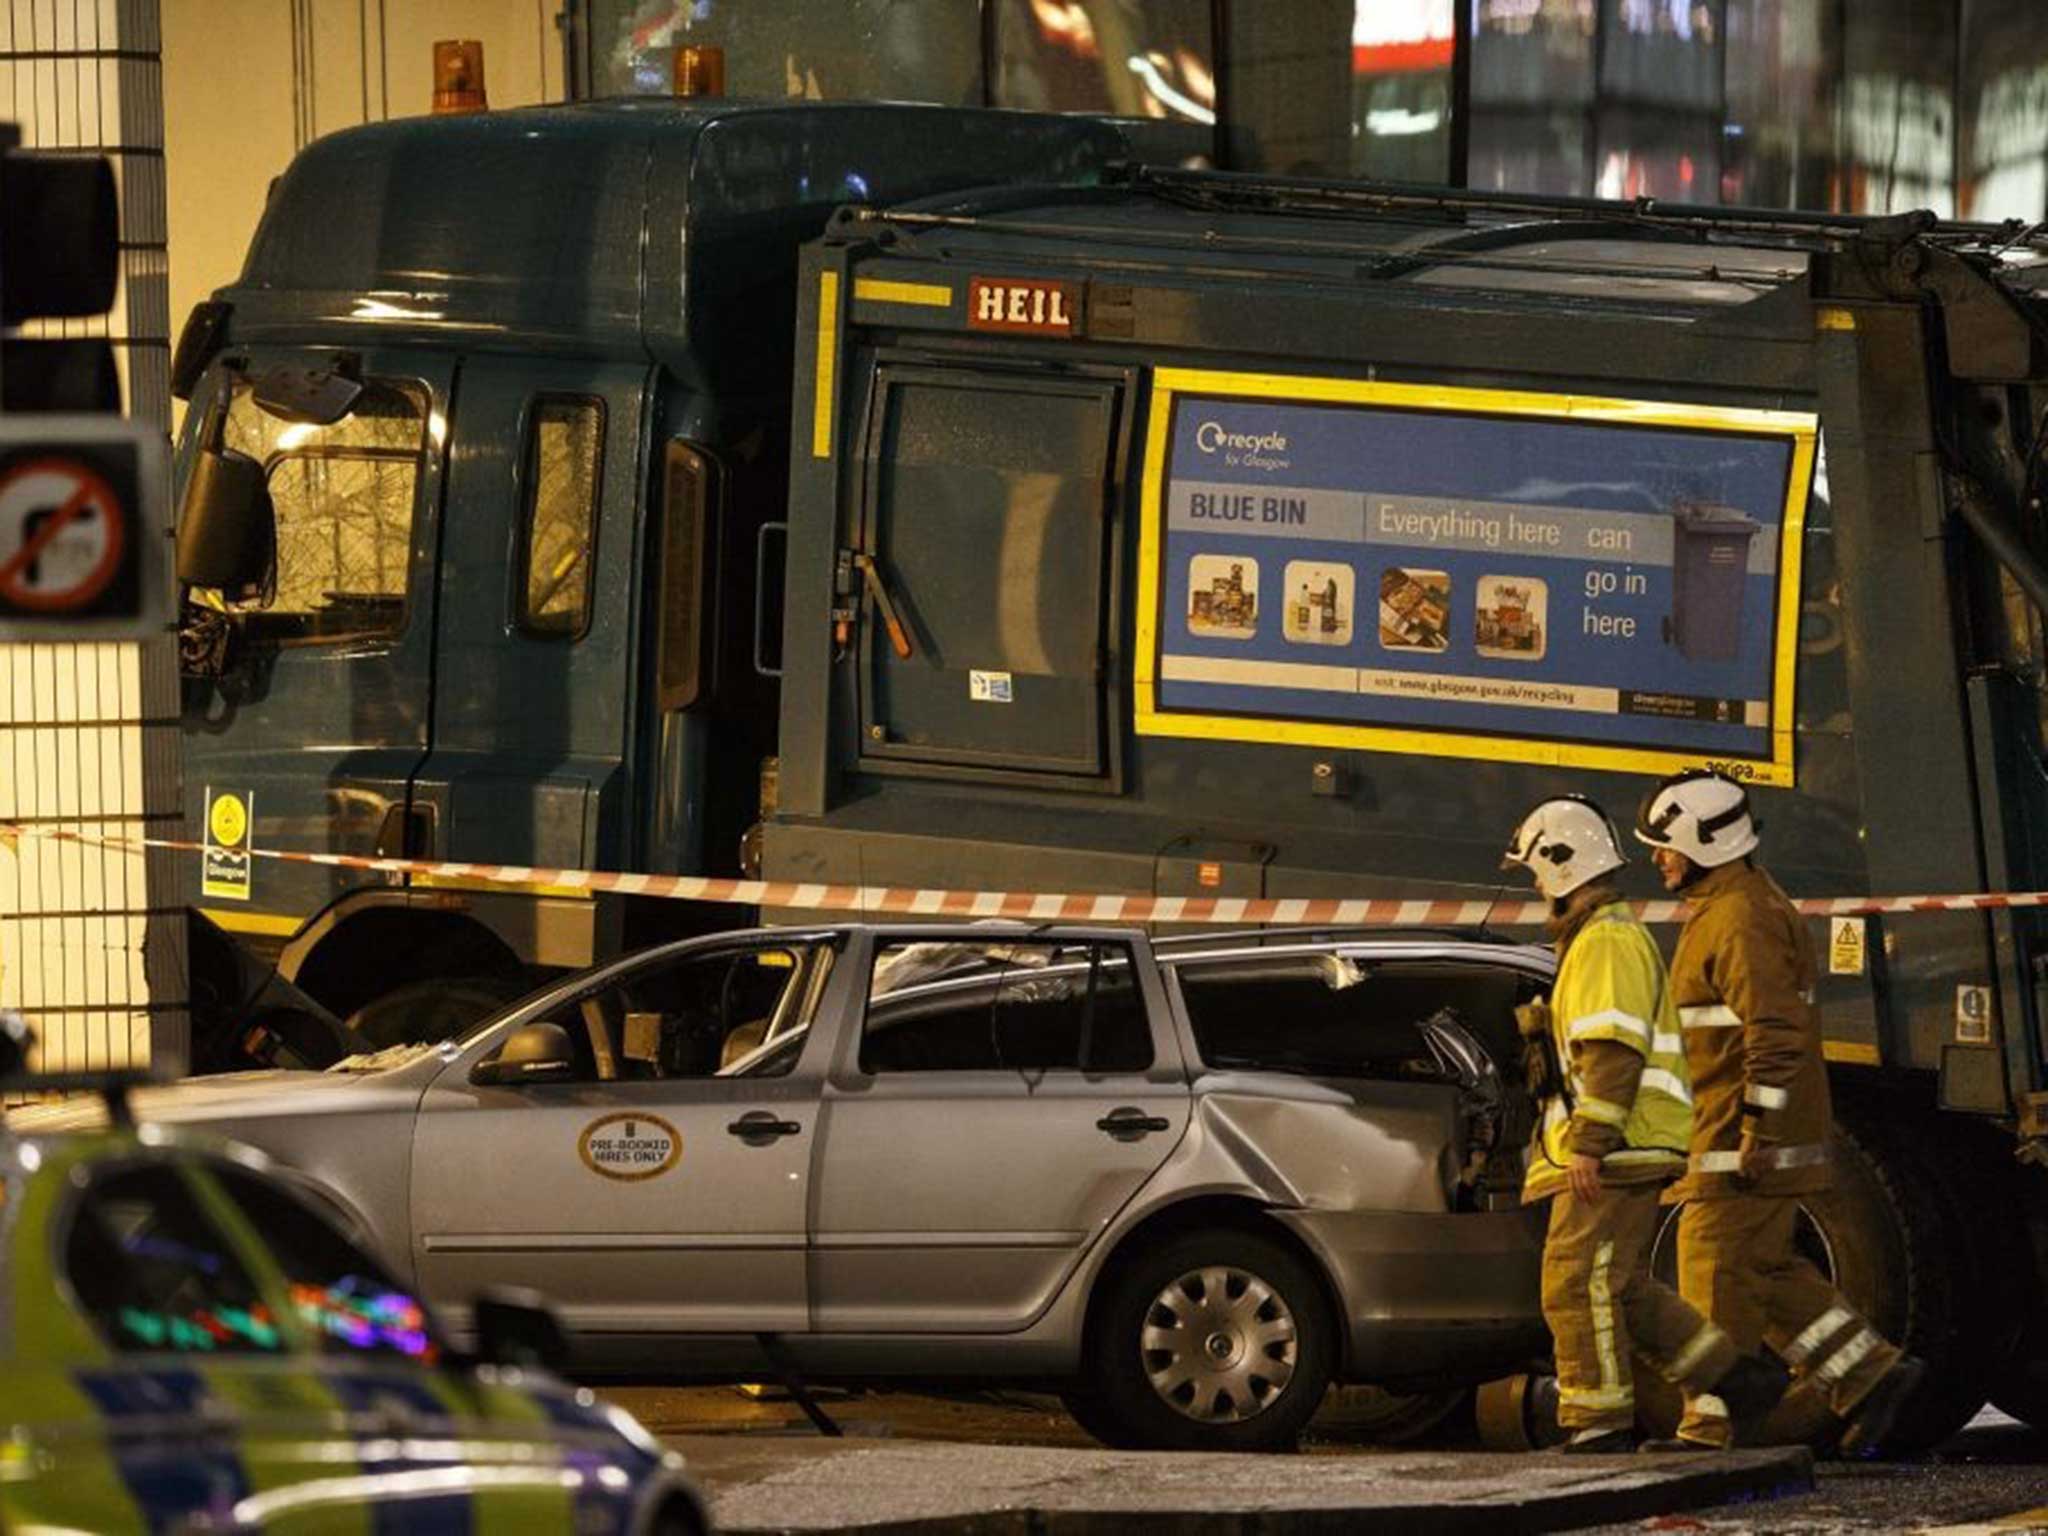 Police have launched an investigation into what caused a bin lorry to veer out of control